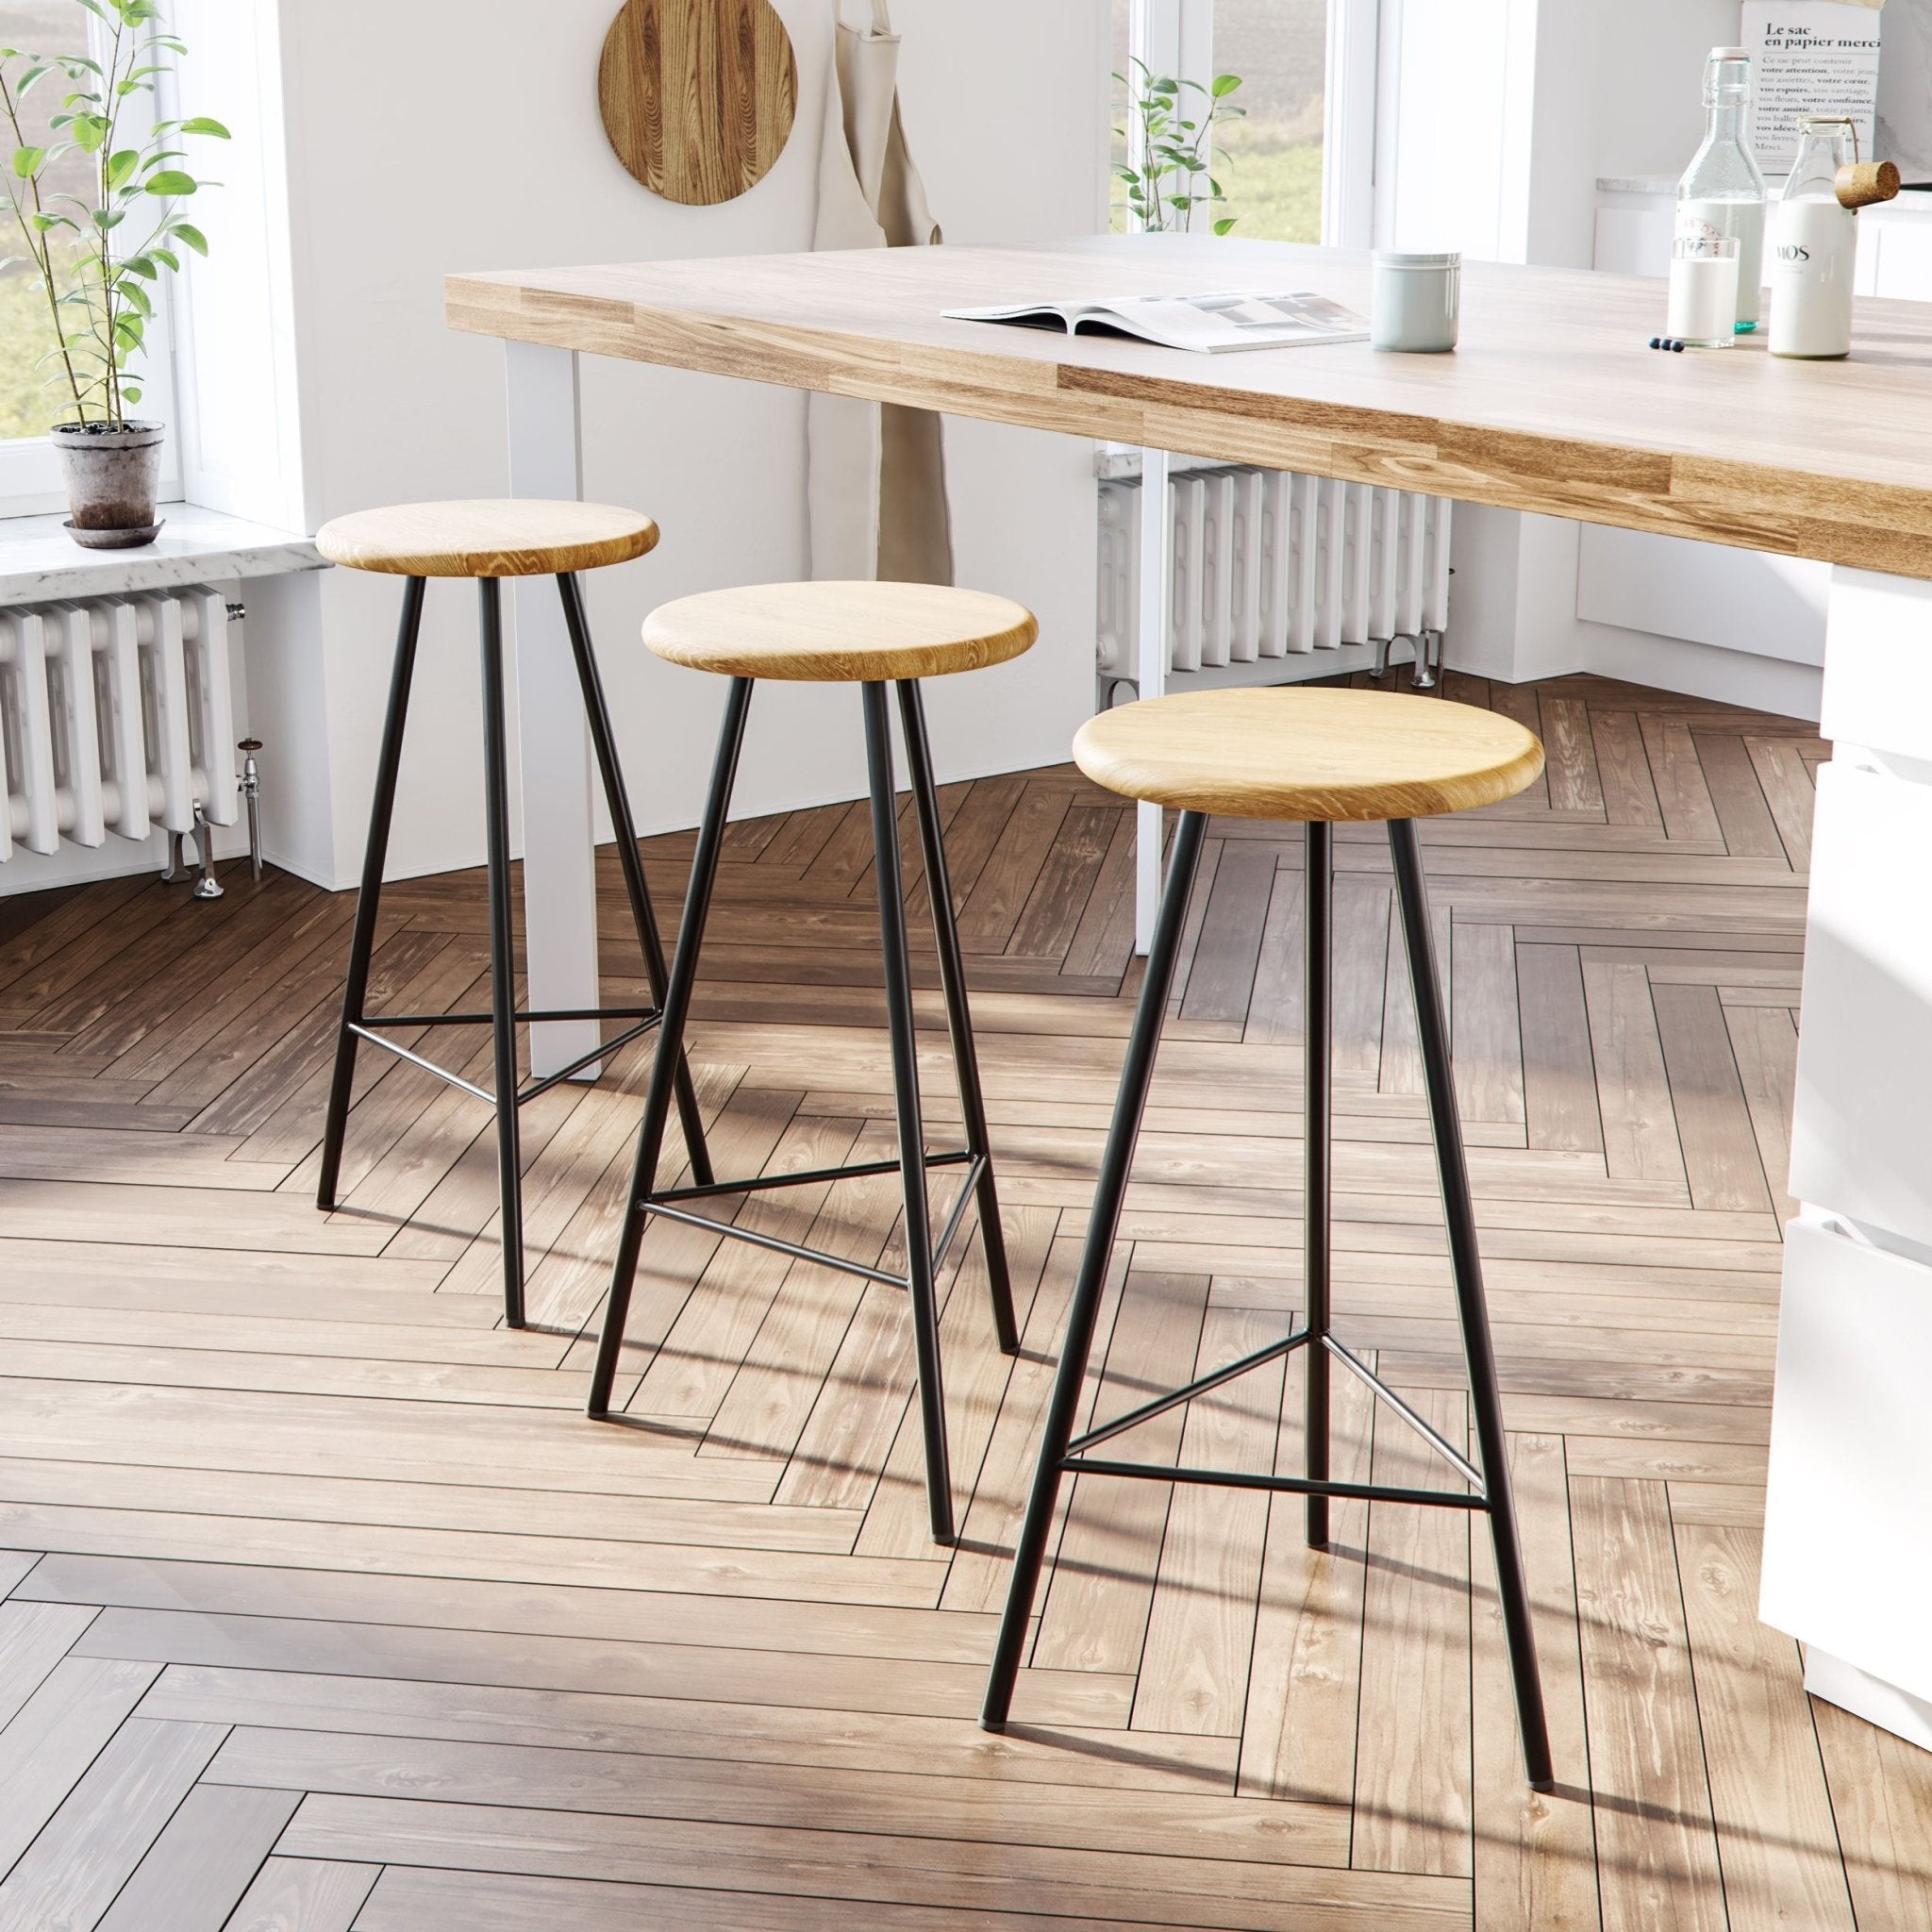 Stool Bases - The Hairpin Leg Co.